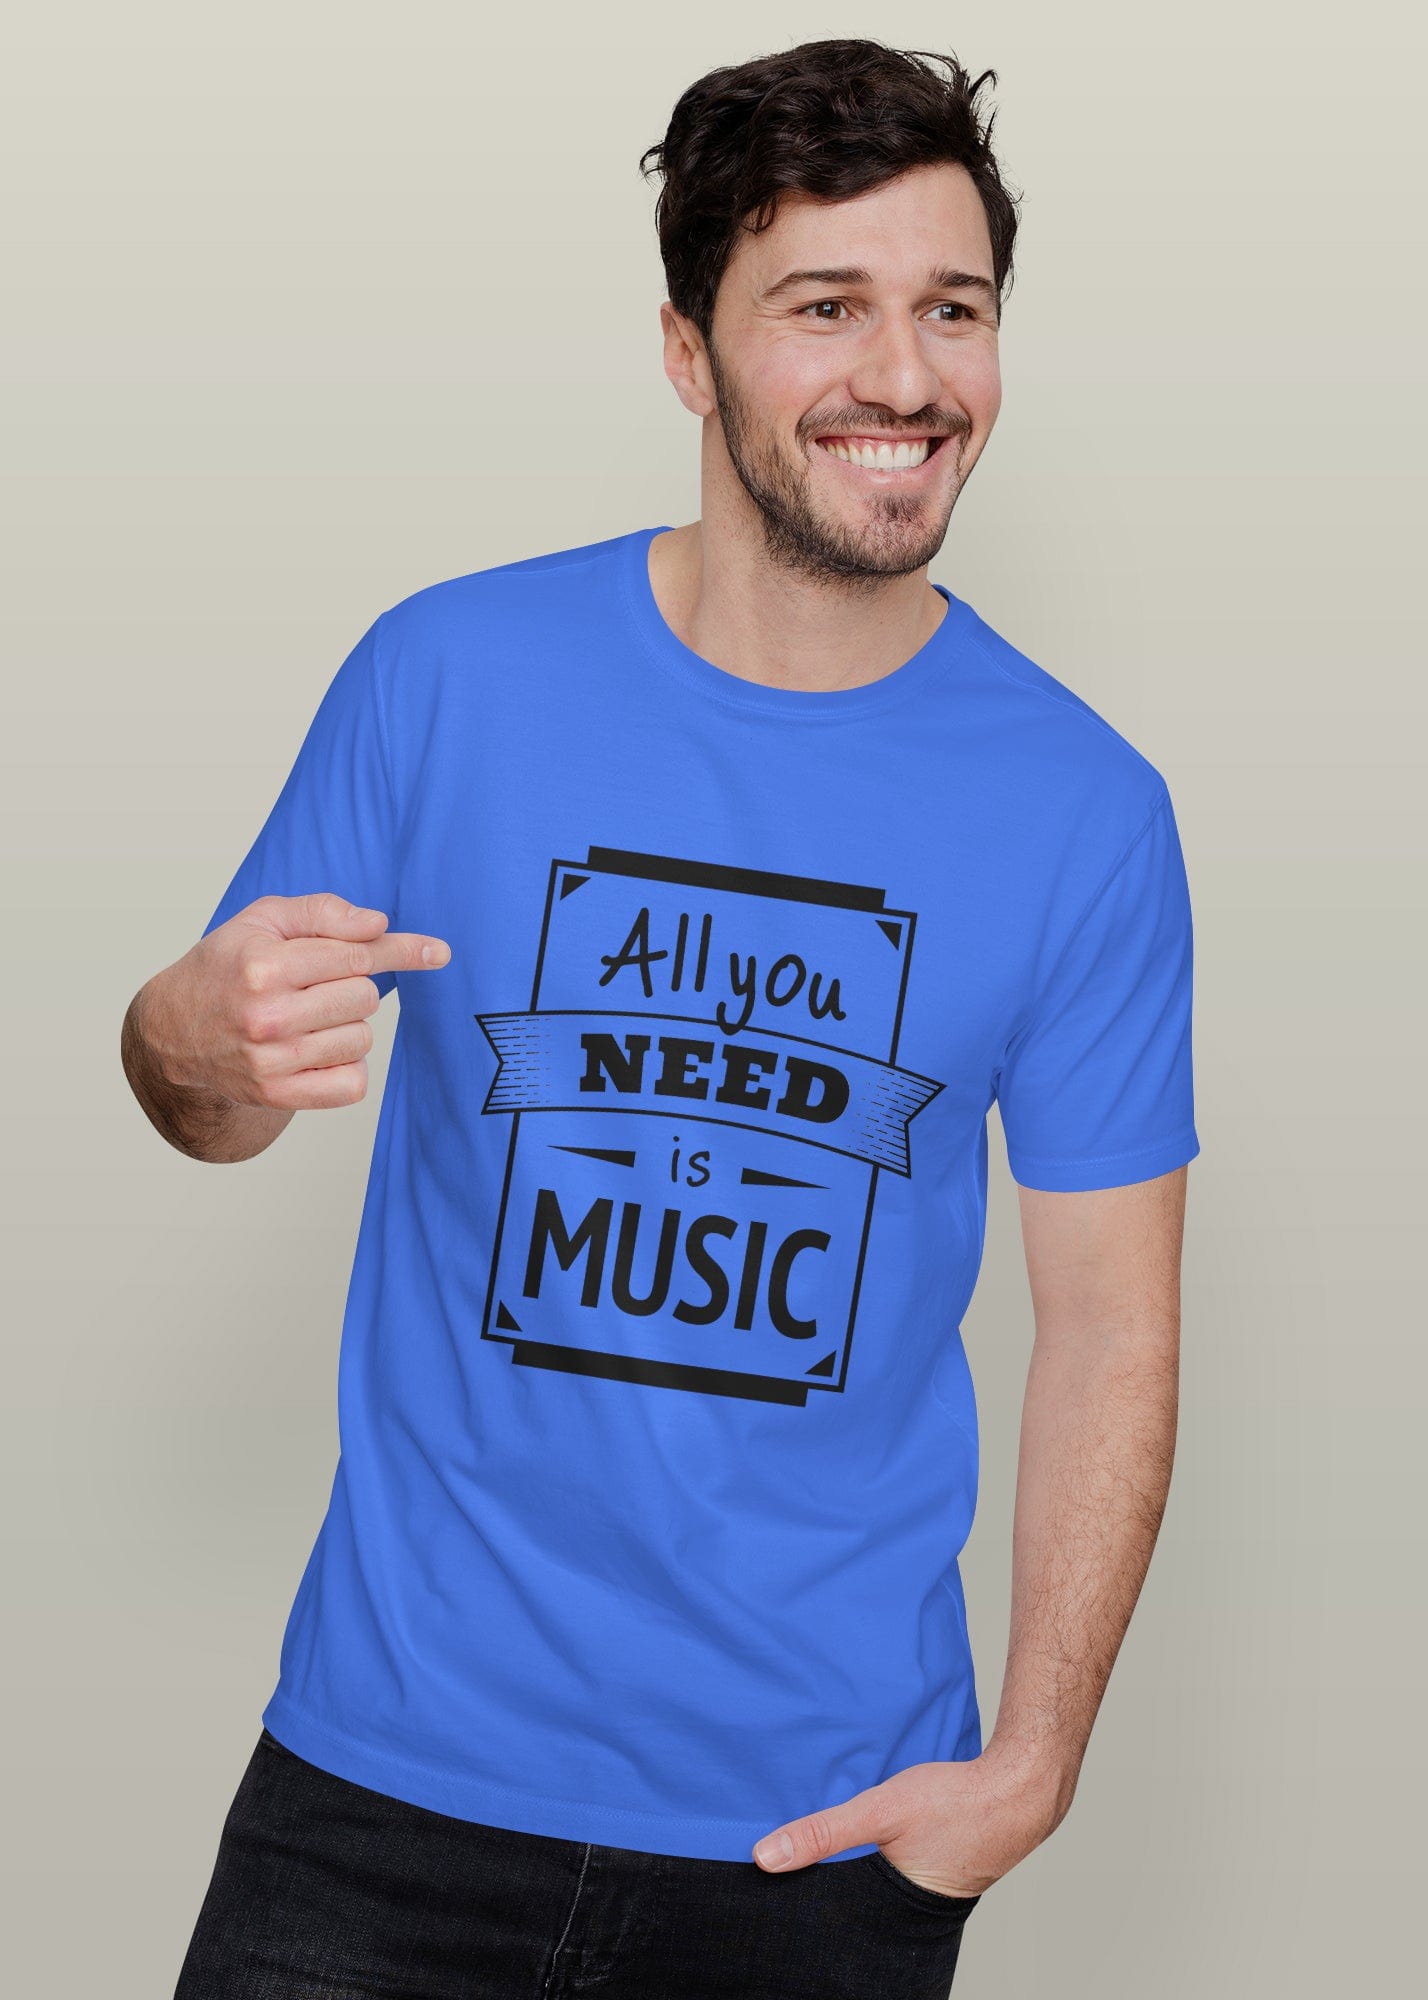 All You Need Is Music Printed Half Sleeve Premium Cotton T-shirt For Men